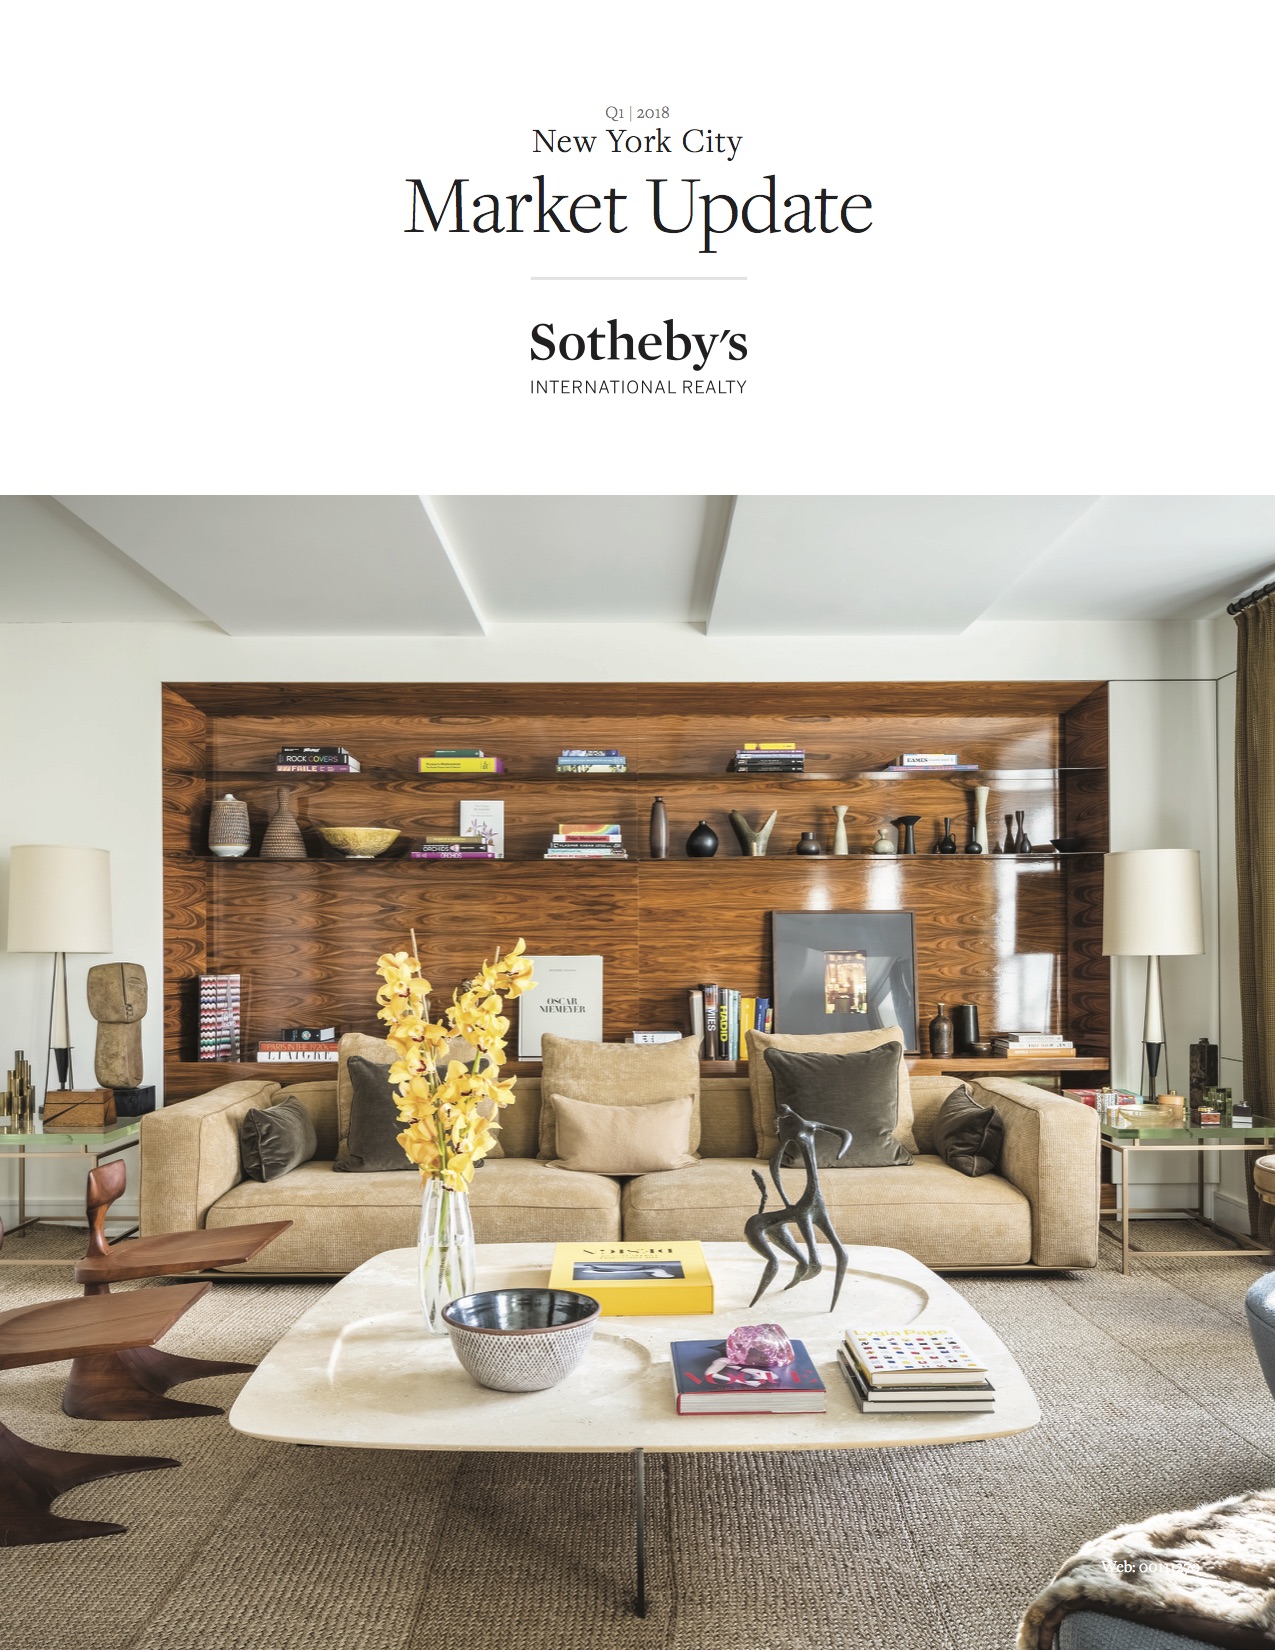 Sotheby's Homes NYC Market Report Q1 2018_1.jpg